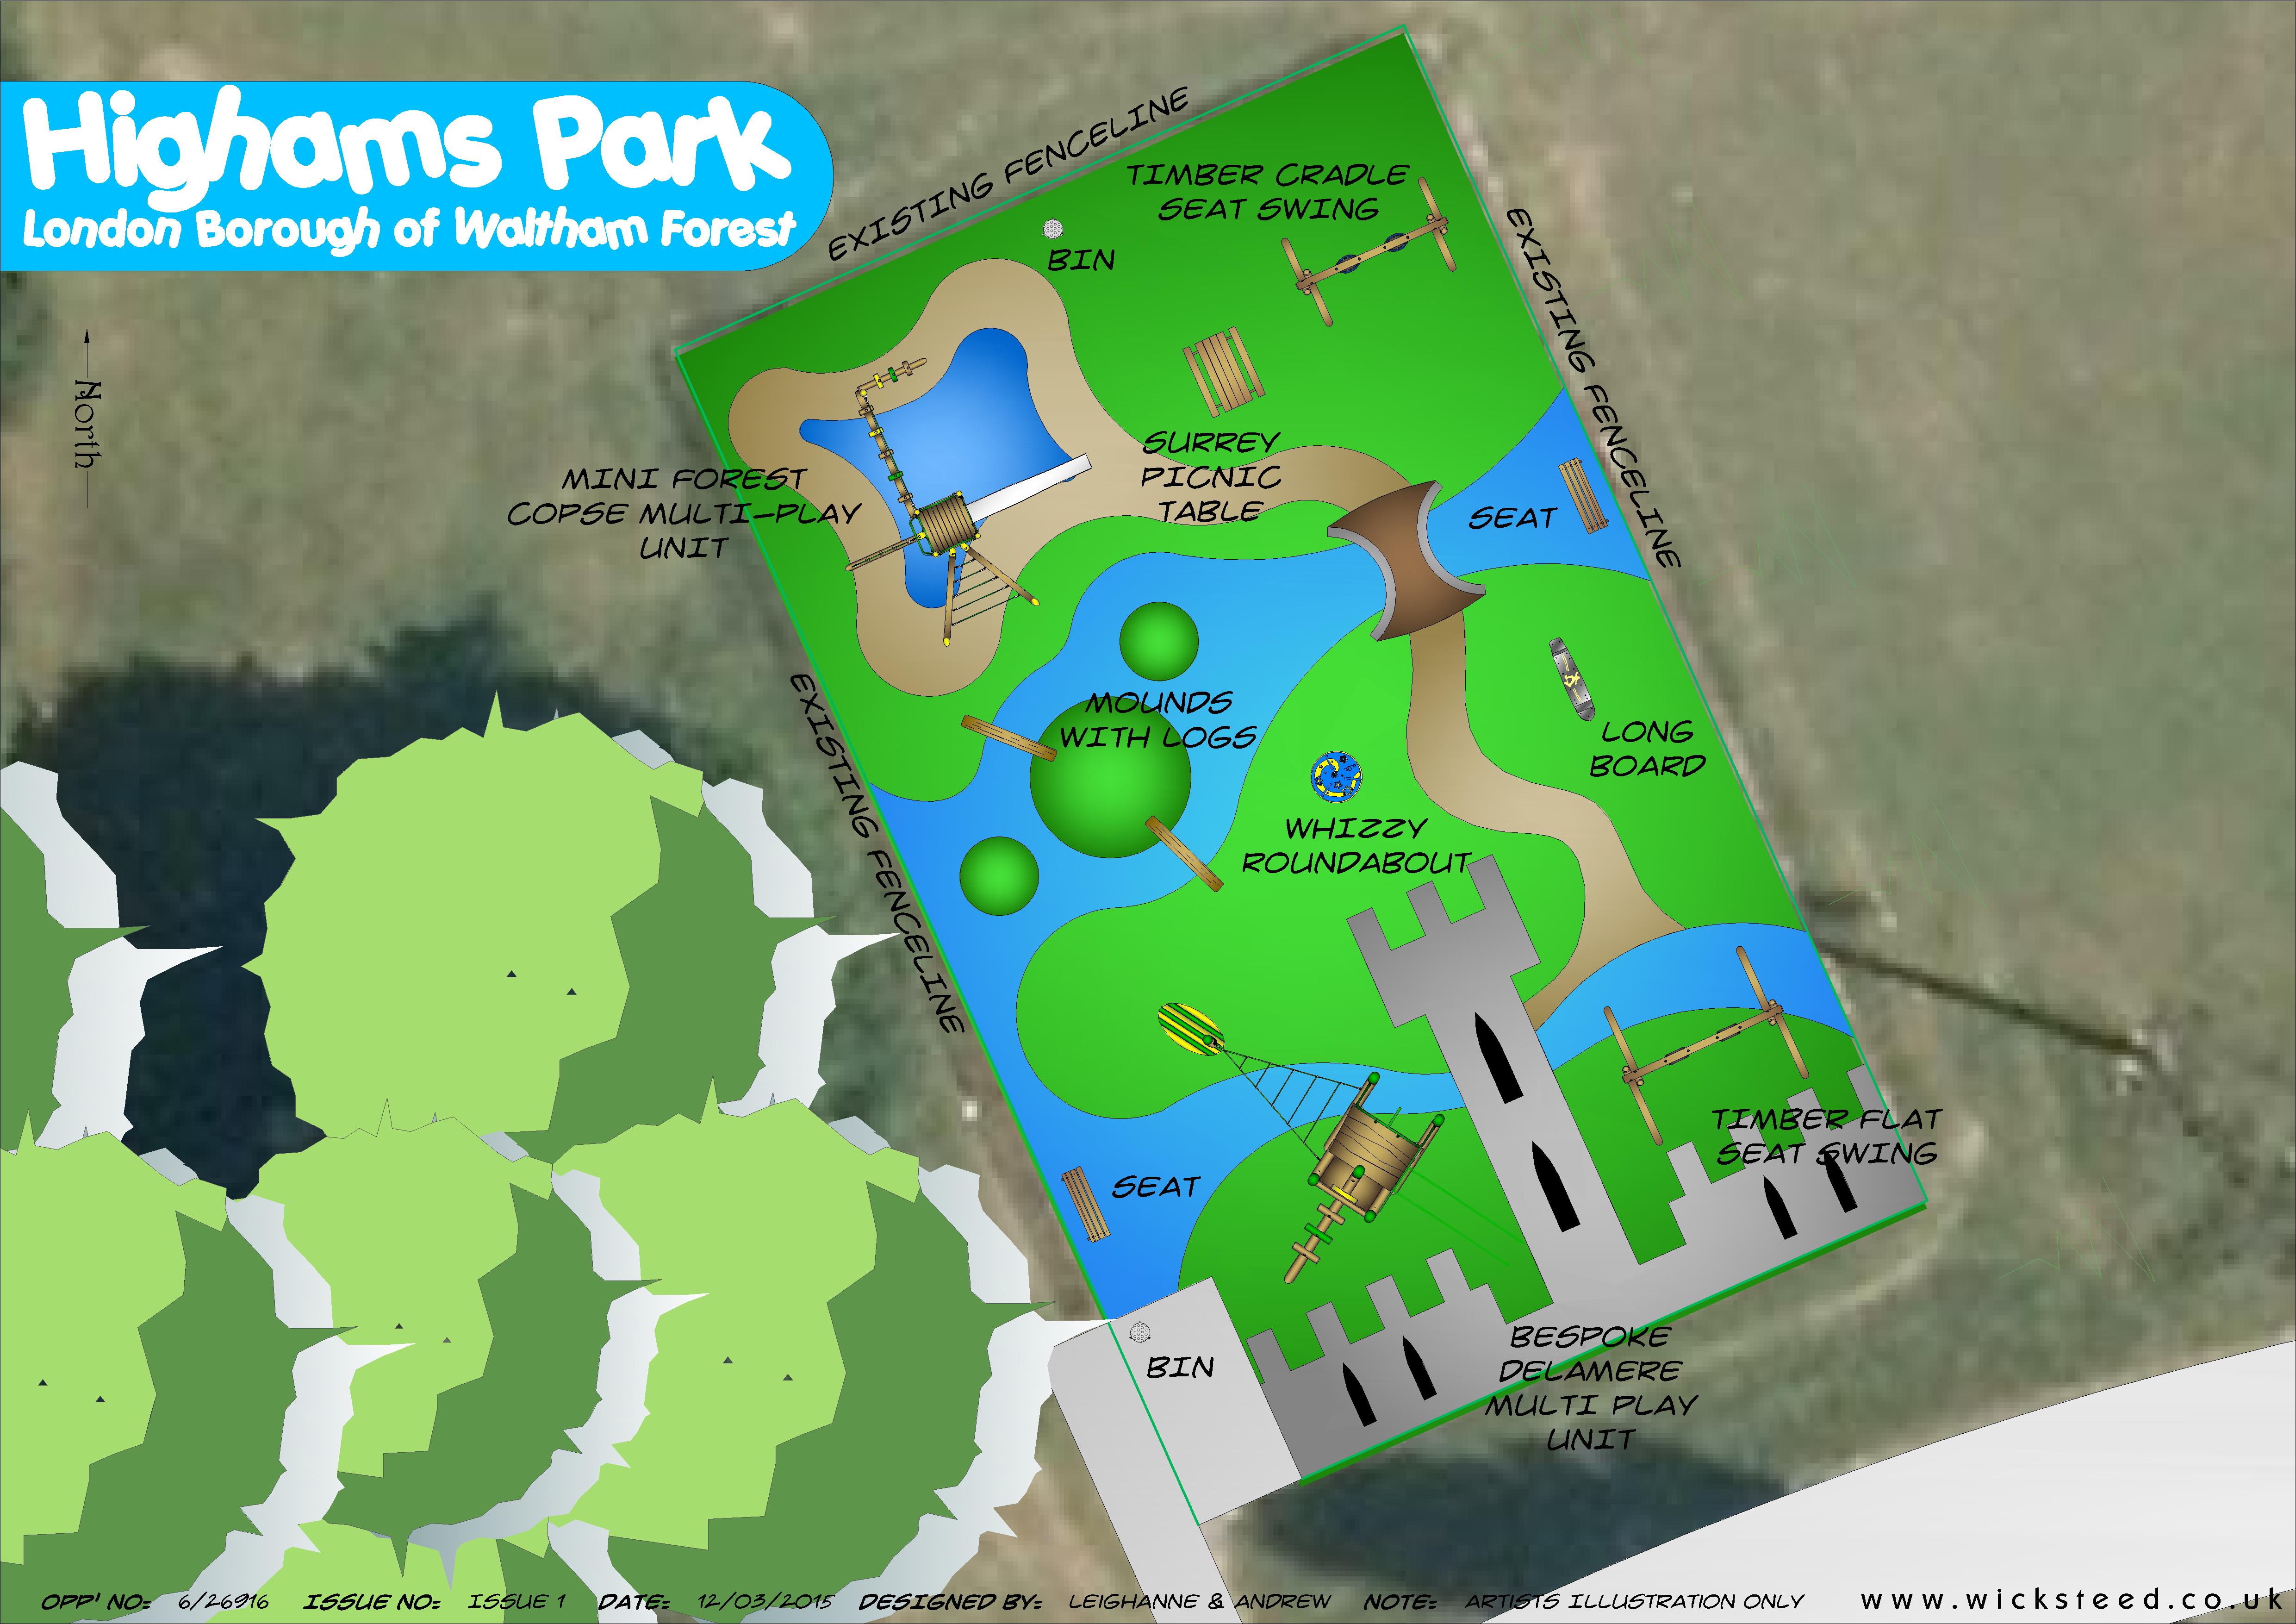 The Council has released details of the Highams Park Play Area Design